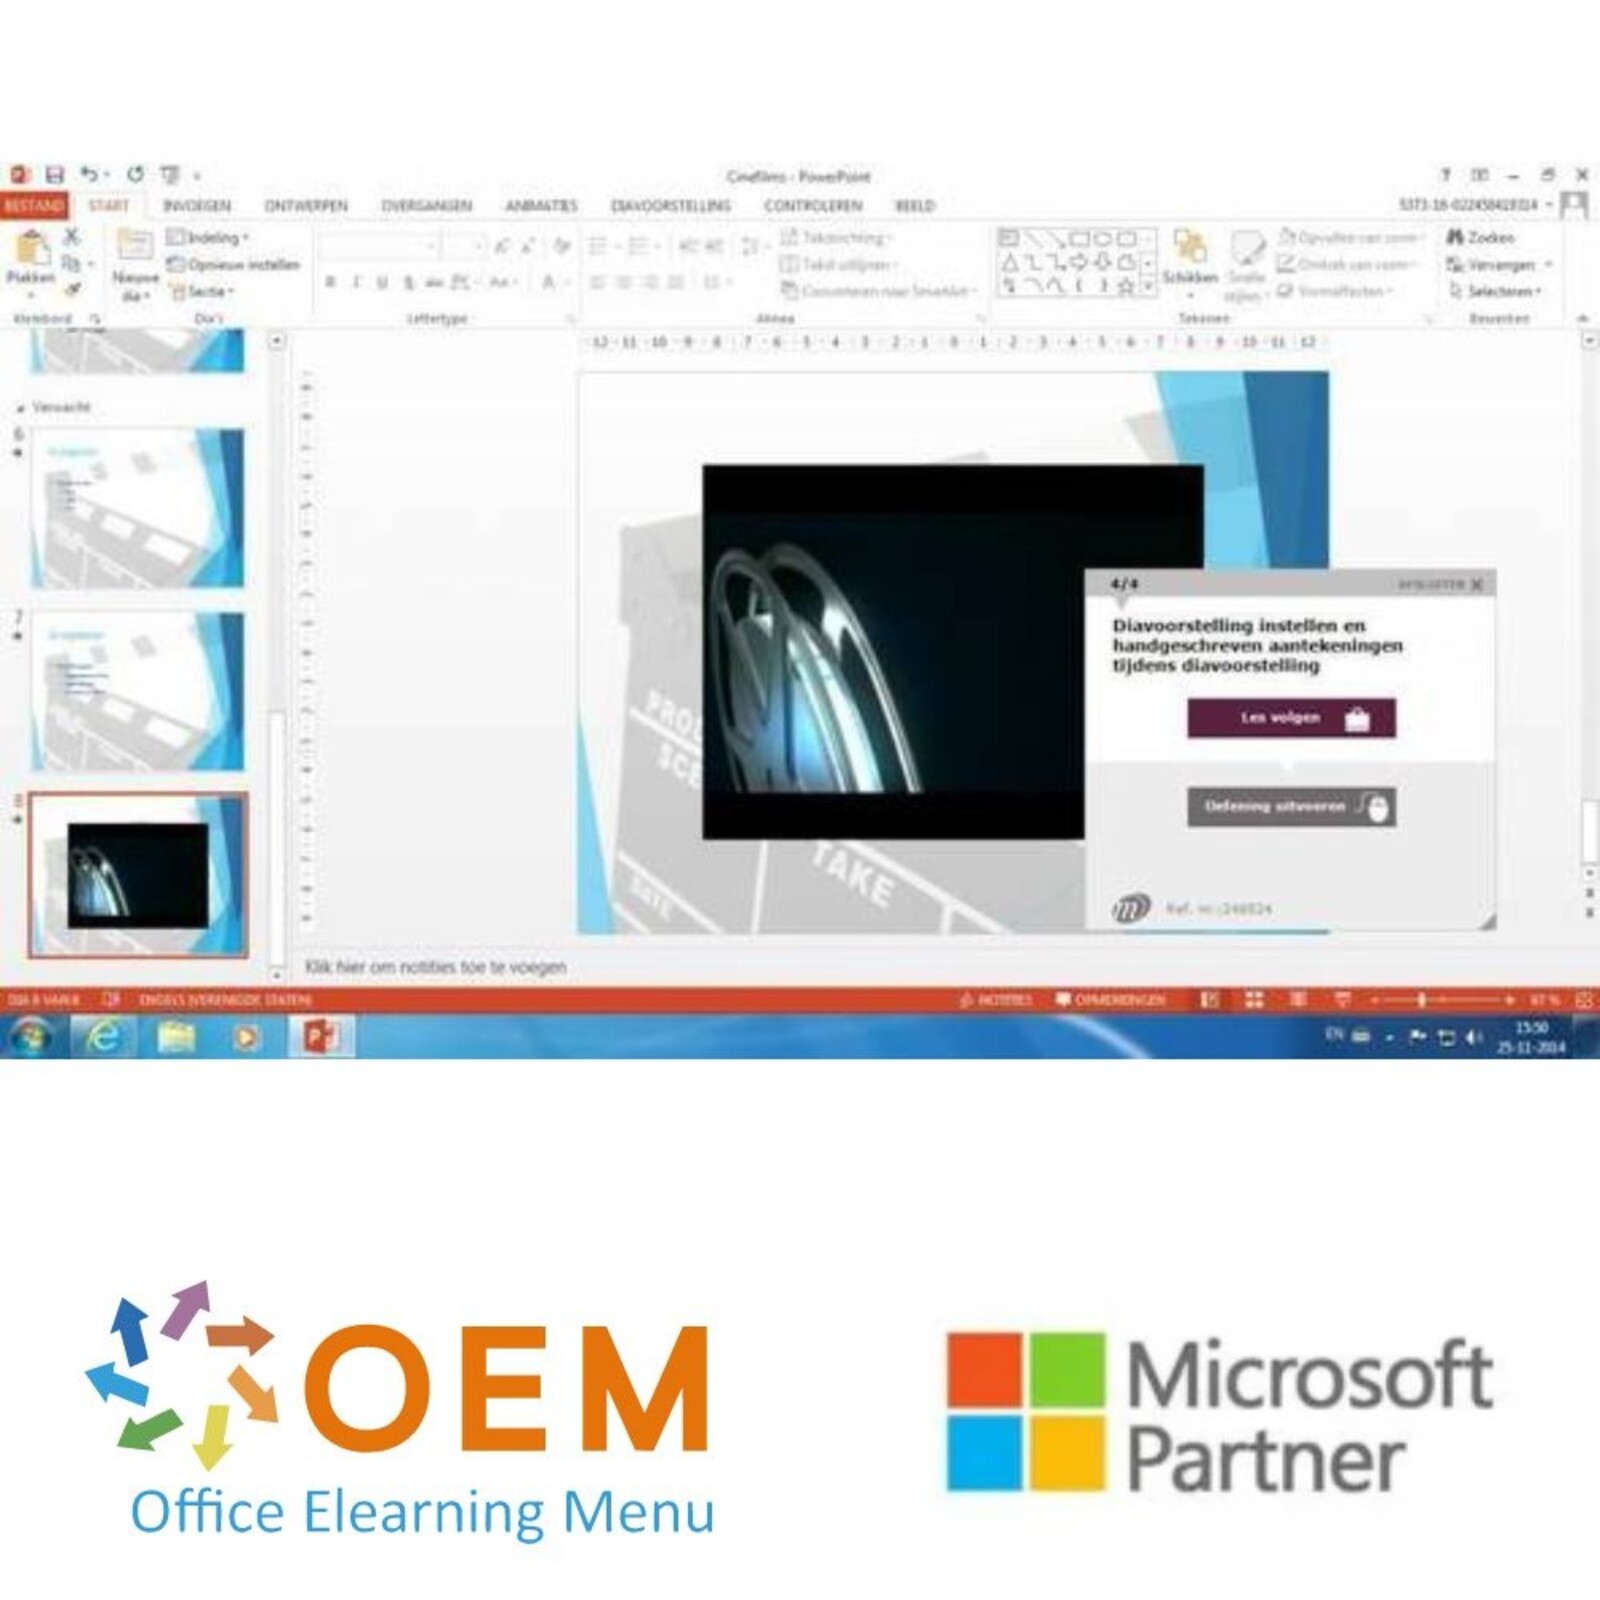 Microsoft PowerPoint PowerPoint 2016 Course Expert E-Learning